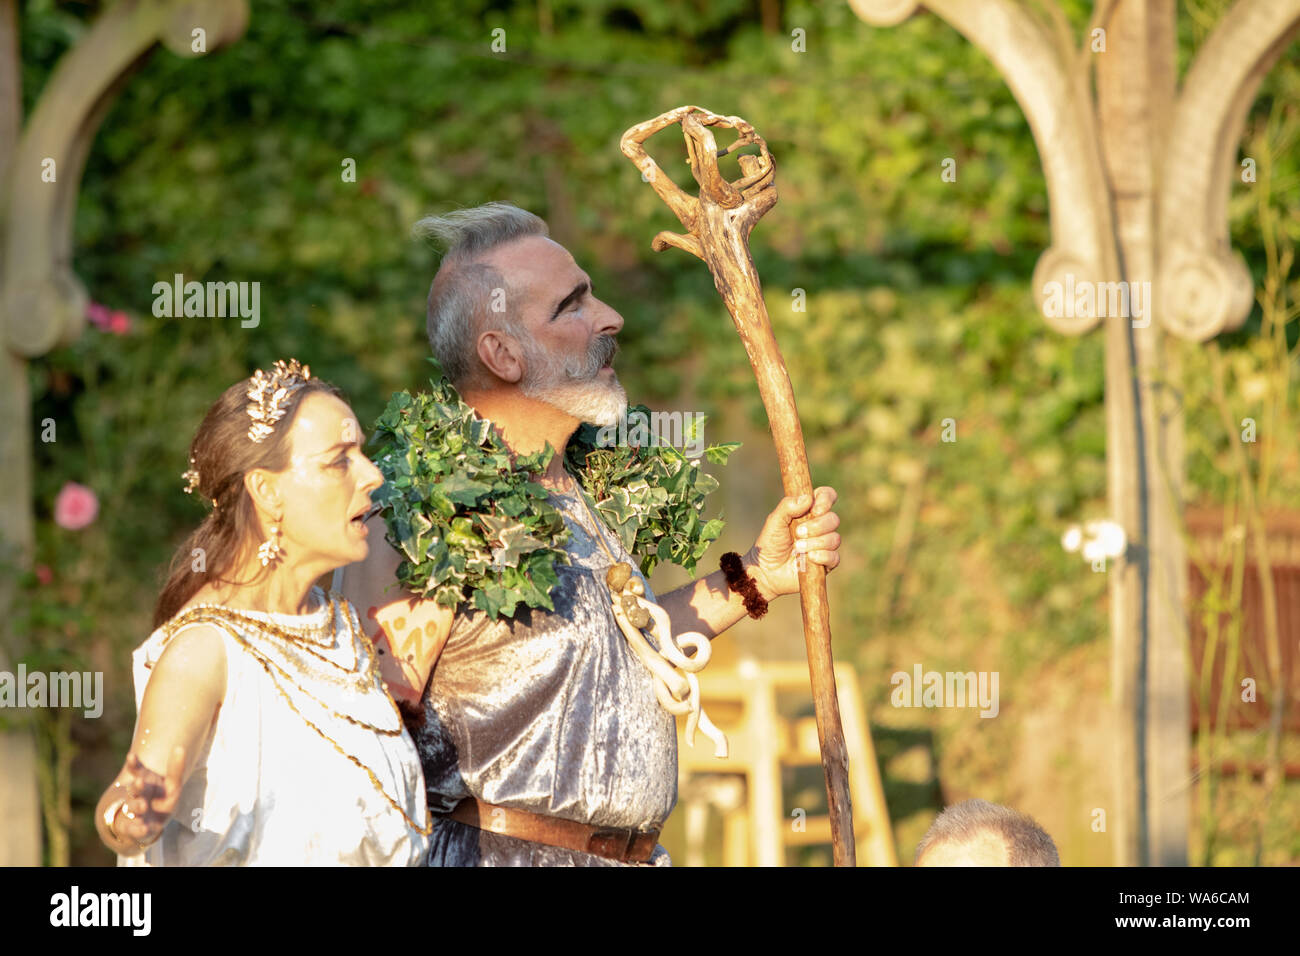 Oberon and Titania King and Queen of the fairies Stock Photo